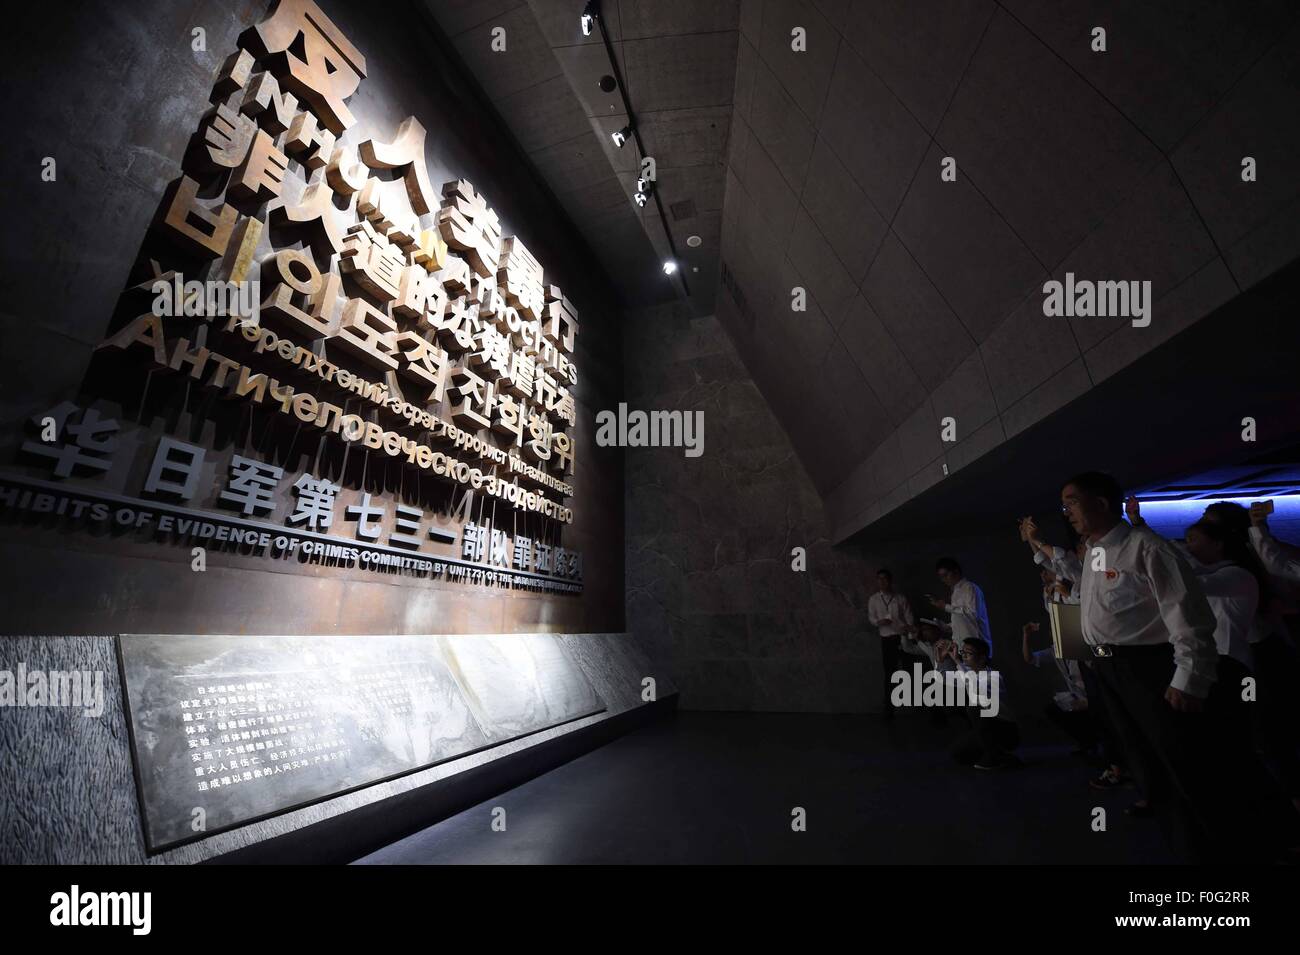 People visit a newly-opened museum about Japanese Army Unit 731 wartime atrocities in Harbin, capital of northeast China's Heilongjiang Province, Aug. 15, 2015. The Museum of Evidence of War Crimes by Japanese Army Unit 731, located on the site of former headquarters of Japanese army unit 731 in Harbin, opened on Saturday. Unit 731 was a biological and chemical warfare research base established in 1935. At least 3,000 people died at the base between 1939 and 1945, mostly in experiments for the development of biological weapons. Stock Photo